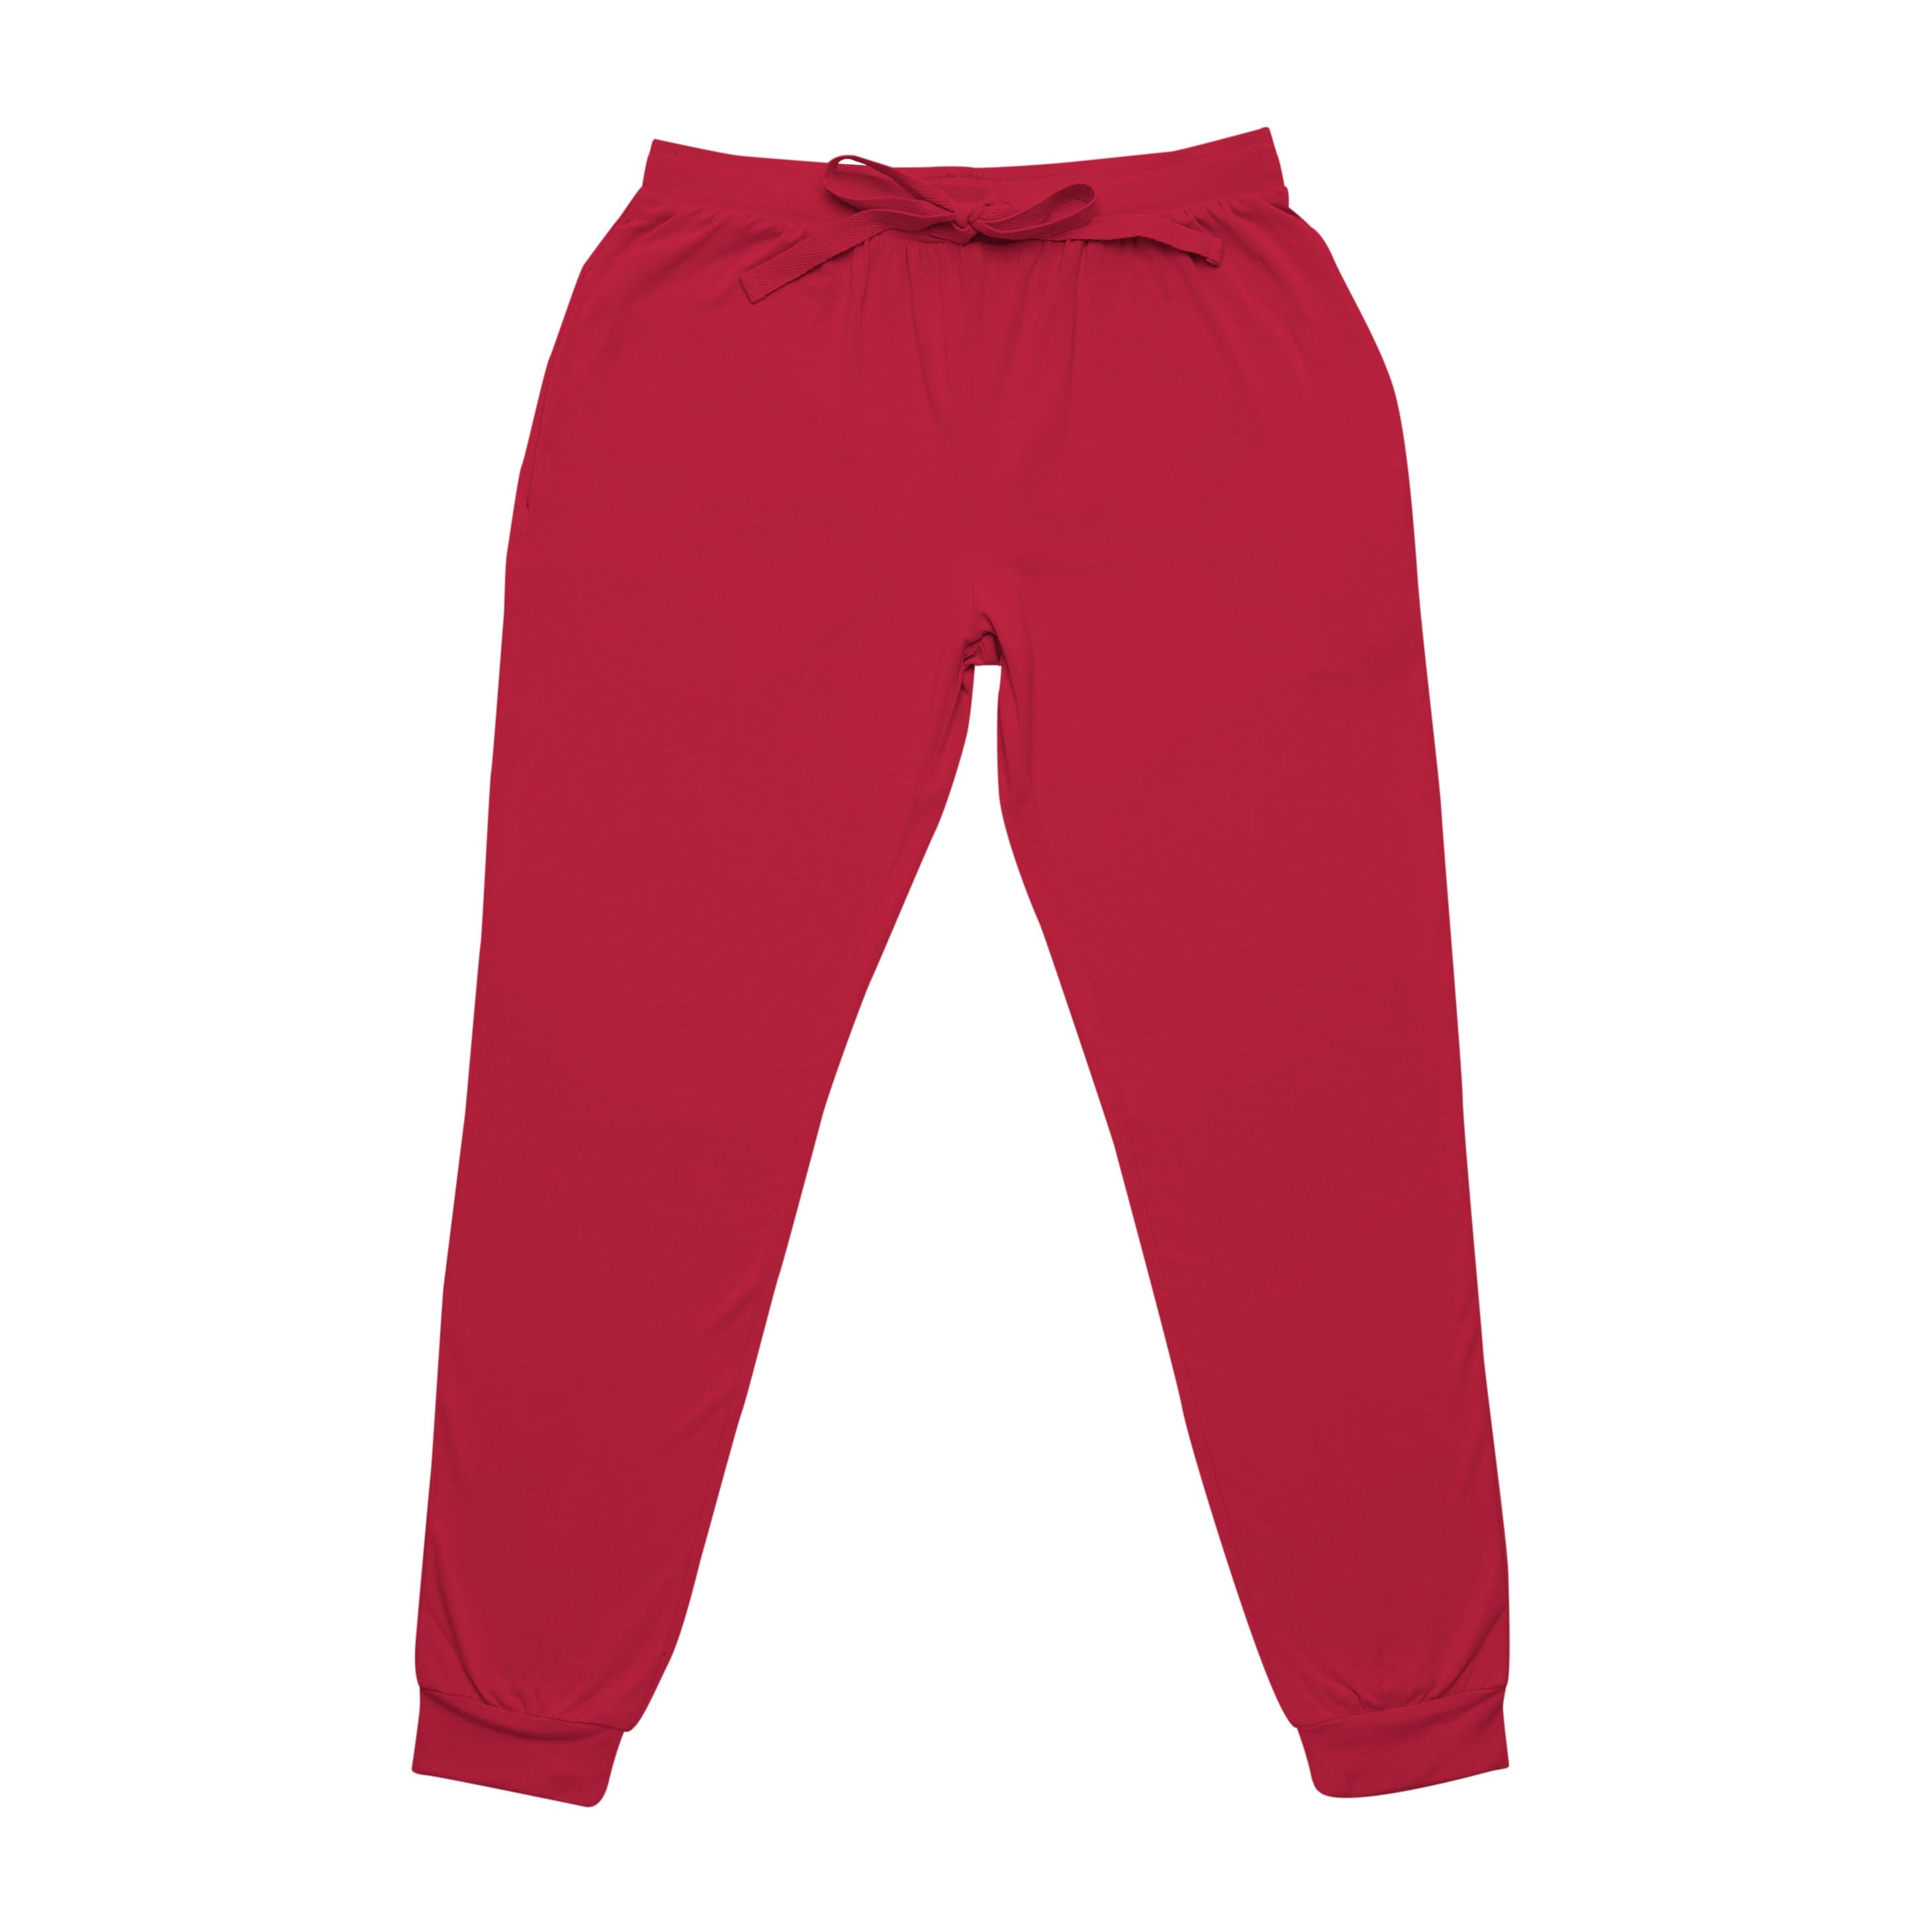 Joggers Pants For Girls And Women